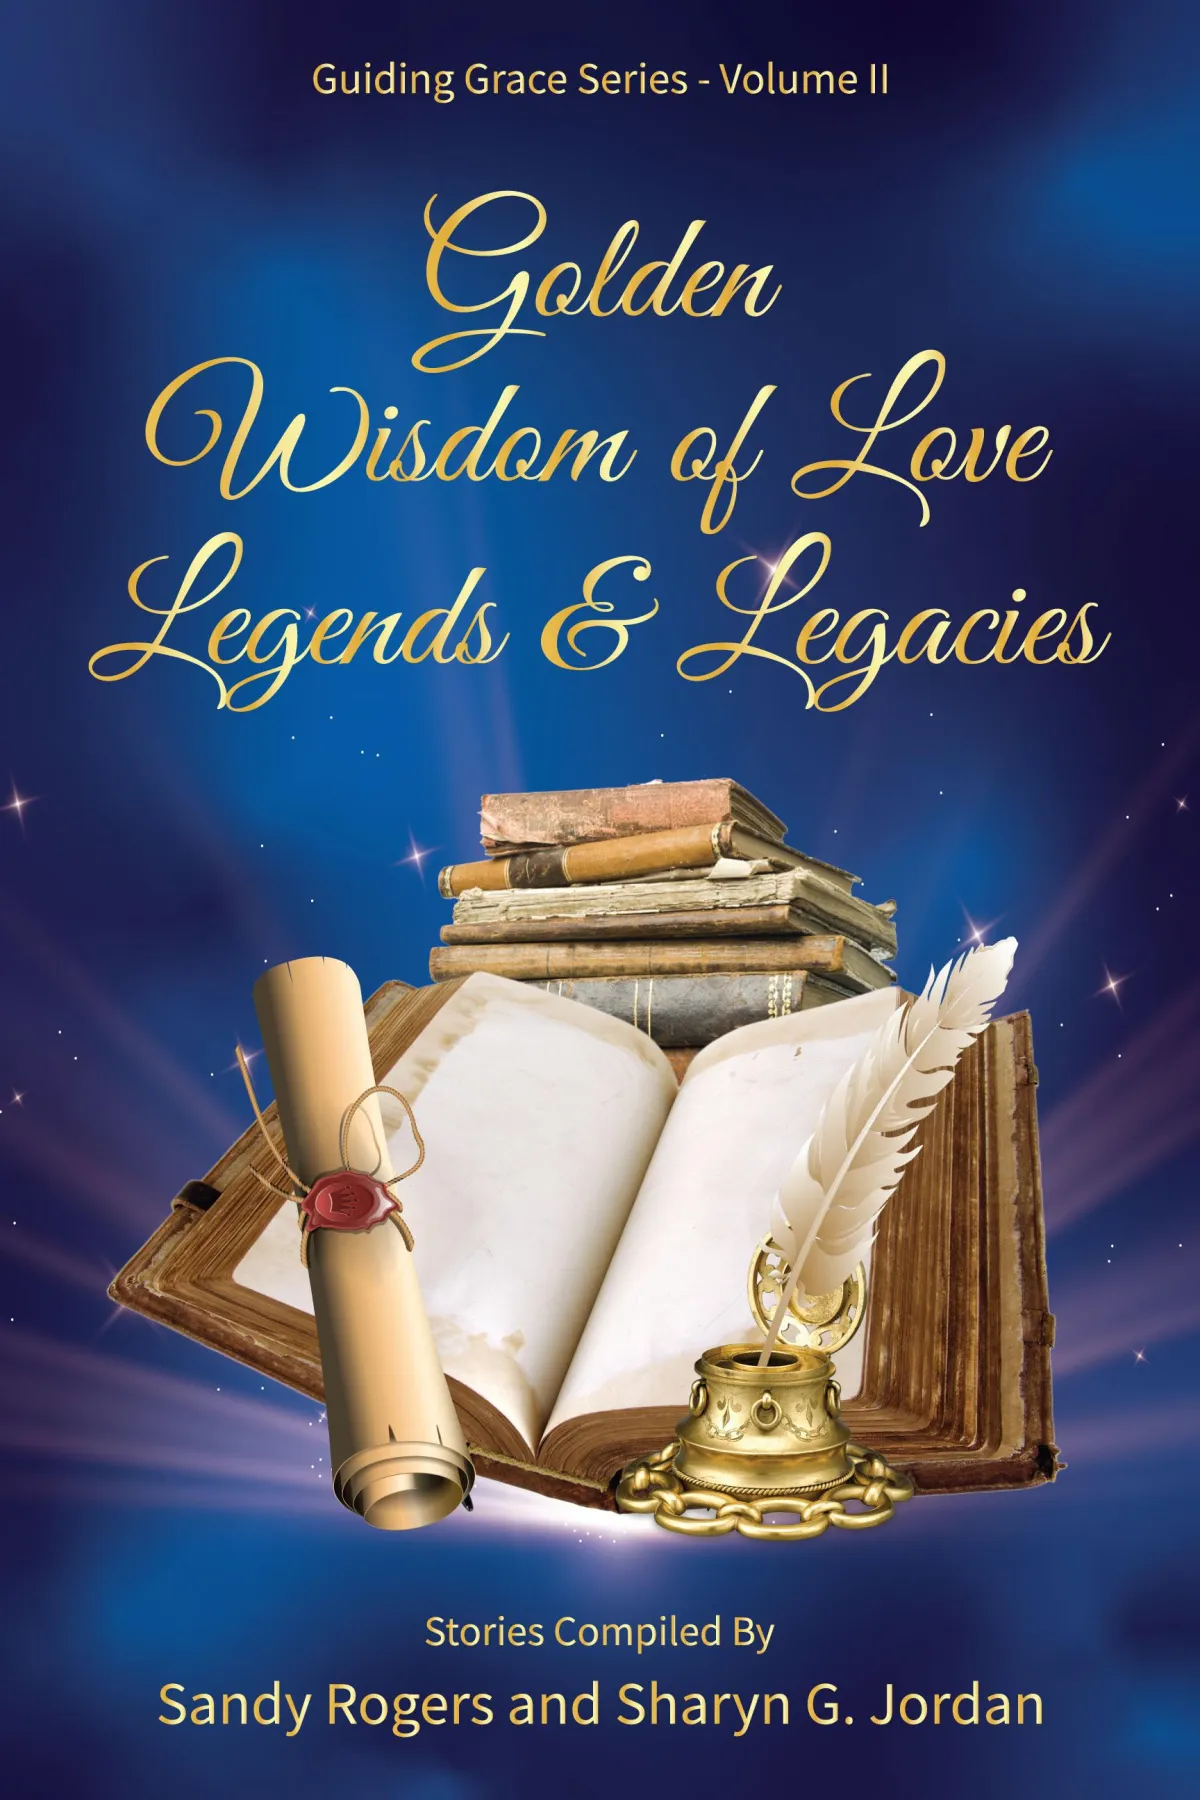 Golden Wisdom of Love, Legends and Legacies by Sandy Rogers and Sharyn G. Jordan _ Spotlight Publishing House